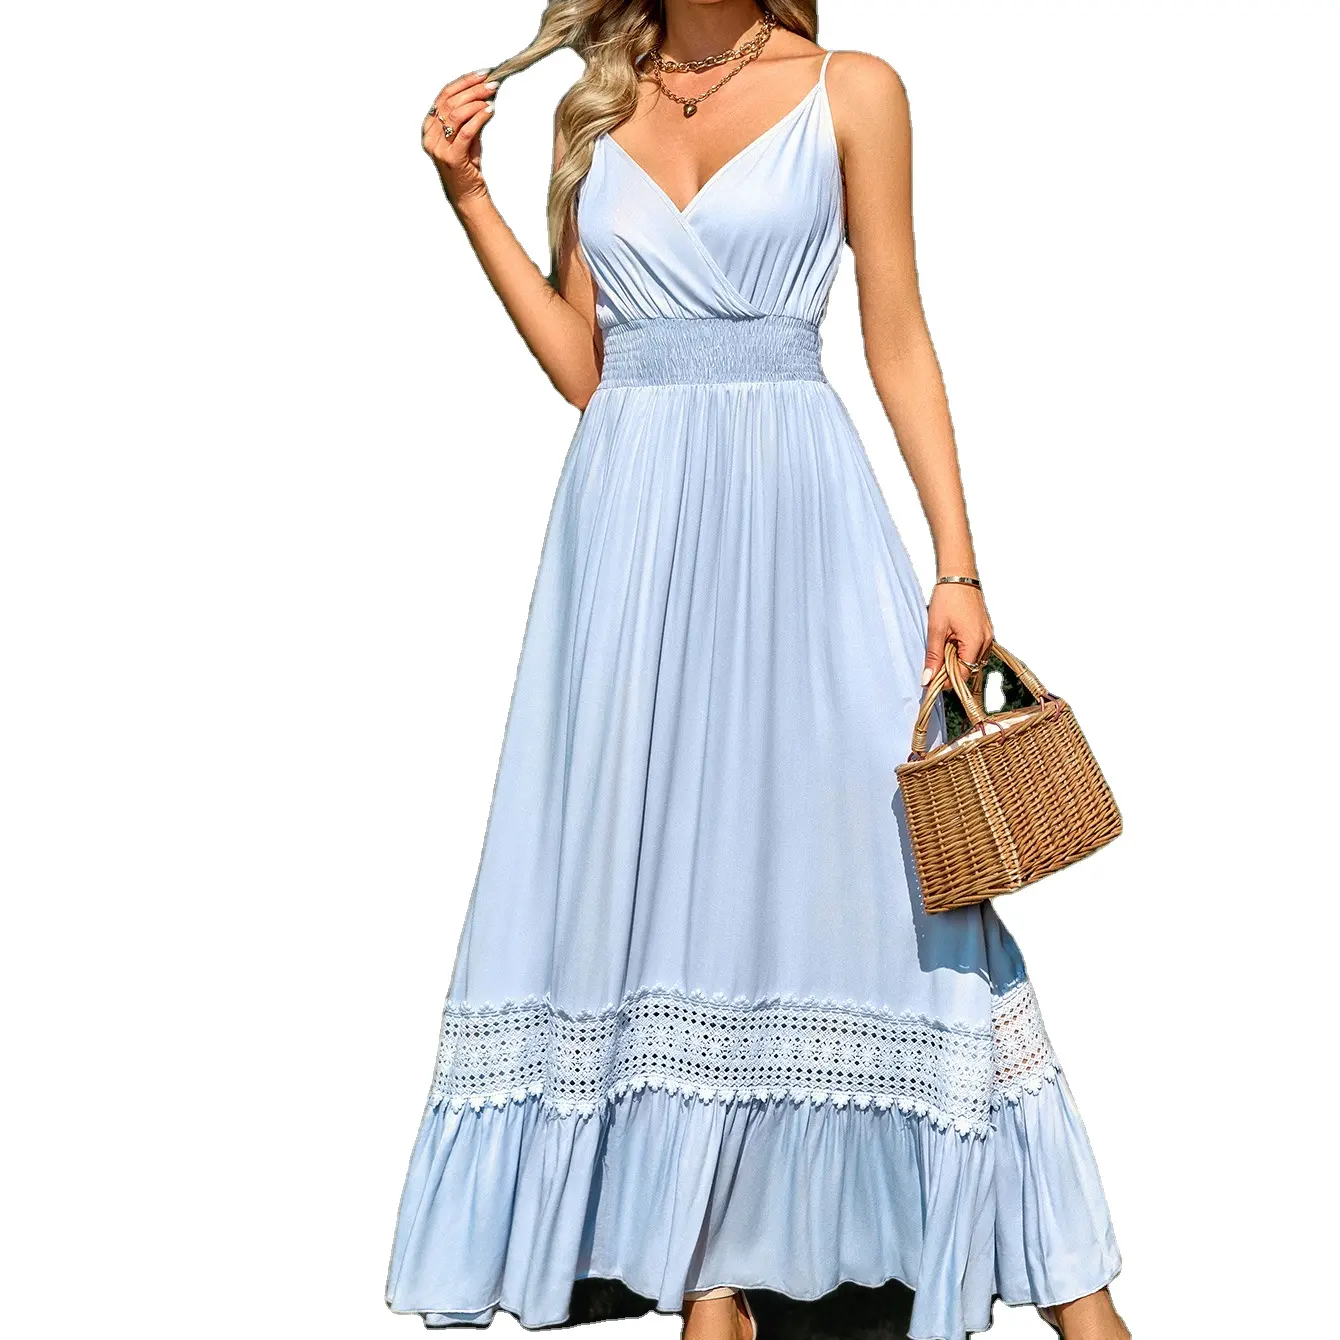 Hot-Sale In Stock Summer Woman Sexy V-Neck Spaghetti Strap Backless Solid Dress For Dating Shopping Casual Long Sling Dress